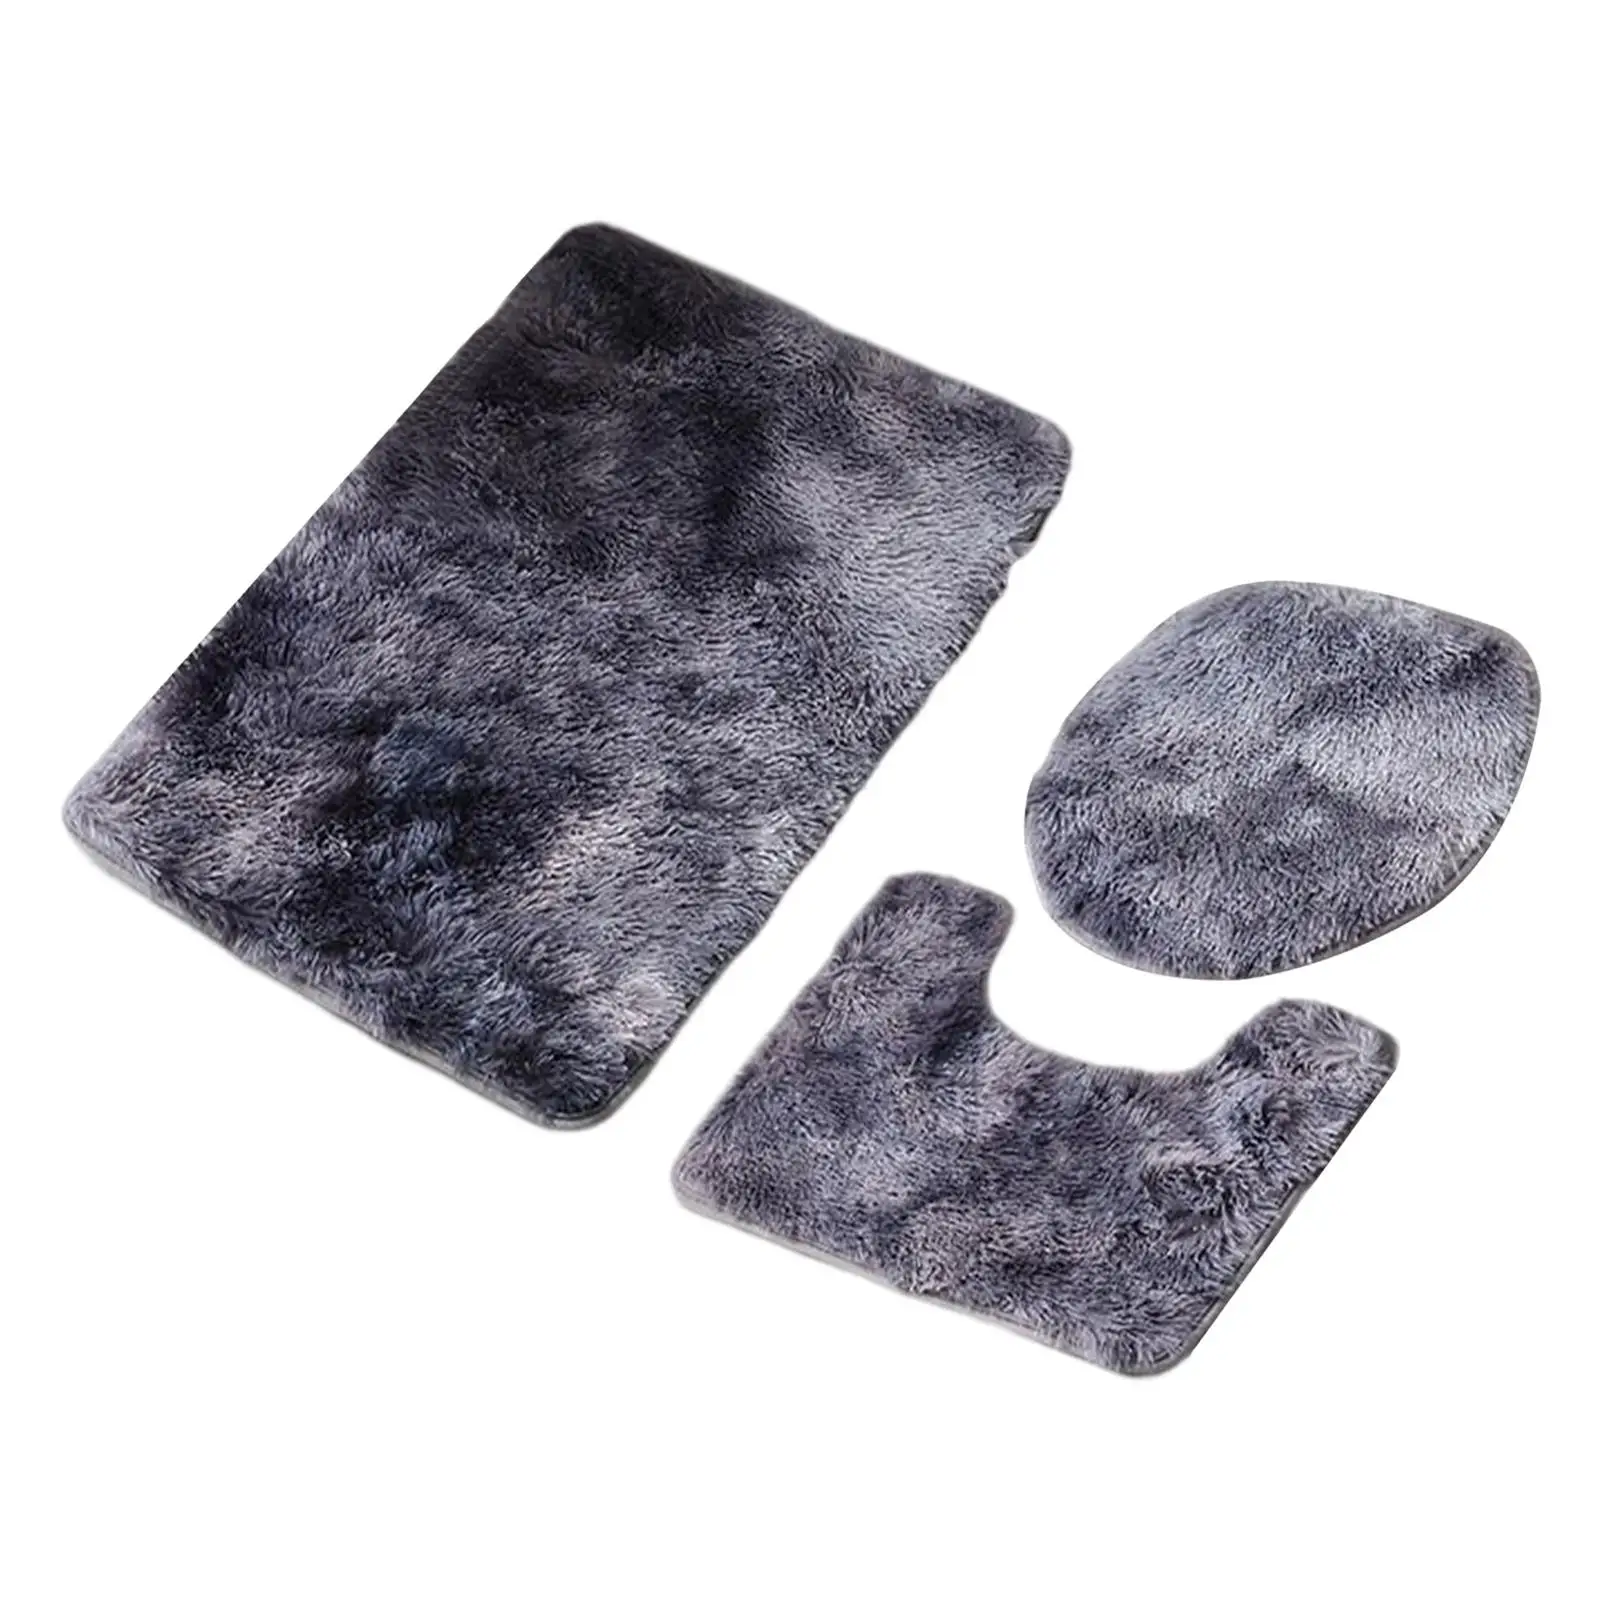 3 Pieces Cozy Bathroom Rug Sets with Toilet Cover Absorbent Bath Mats Set for Bathroom Shower Bathroom Floors Tub Under The Sink